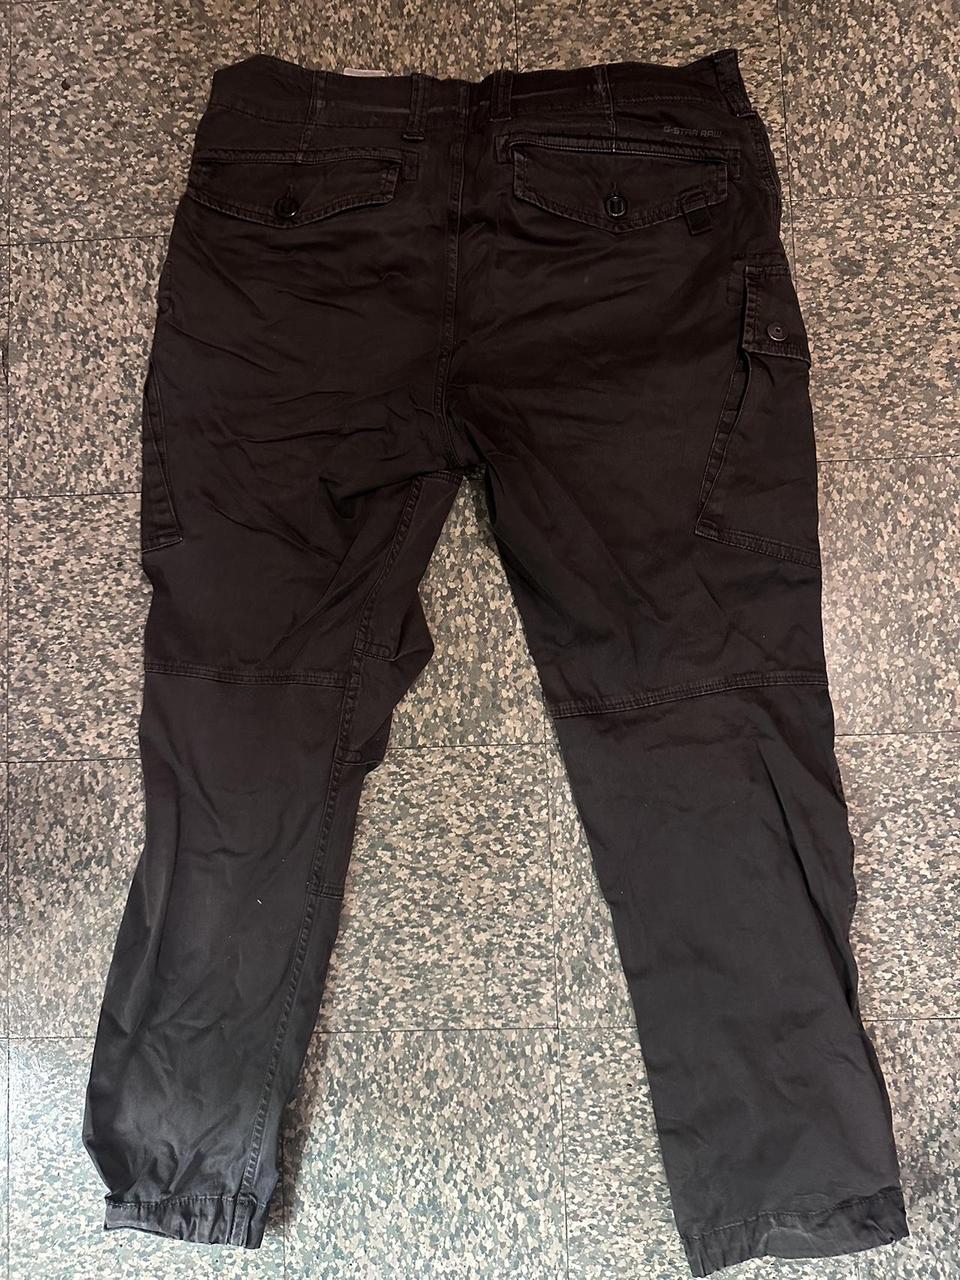 G Star black cargo pants. Fits true to size, perfect... - Depop